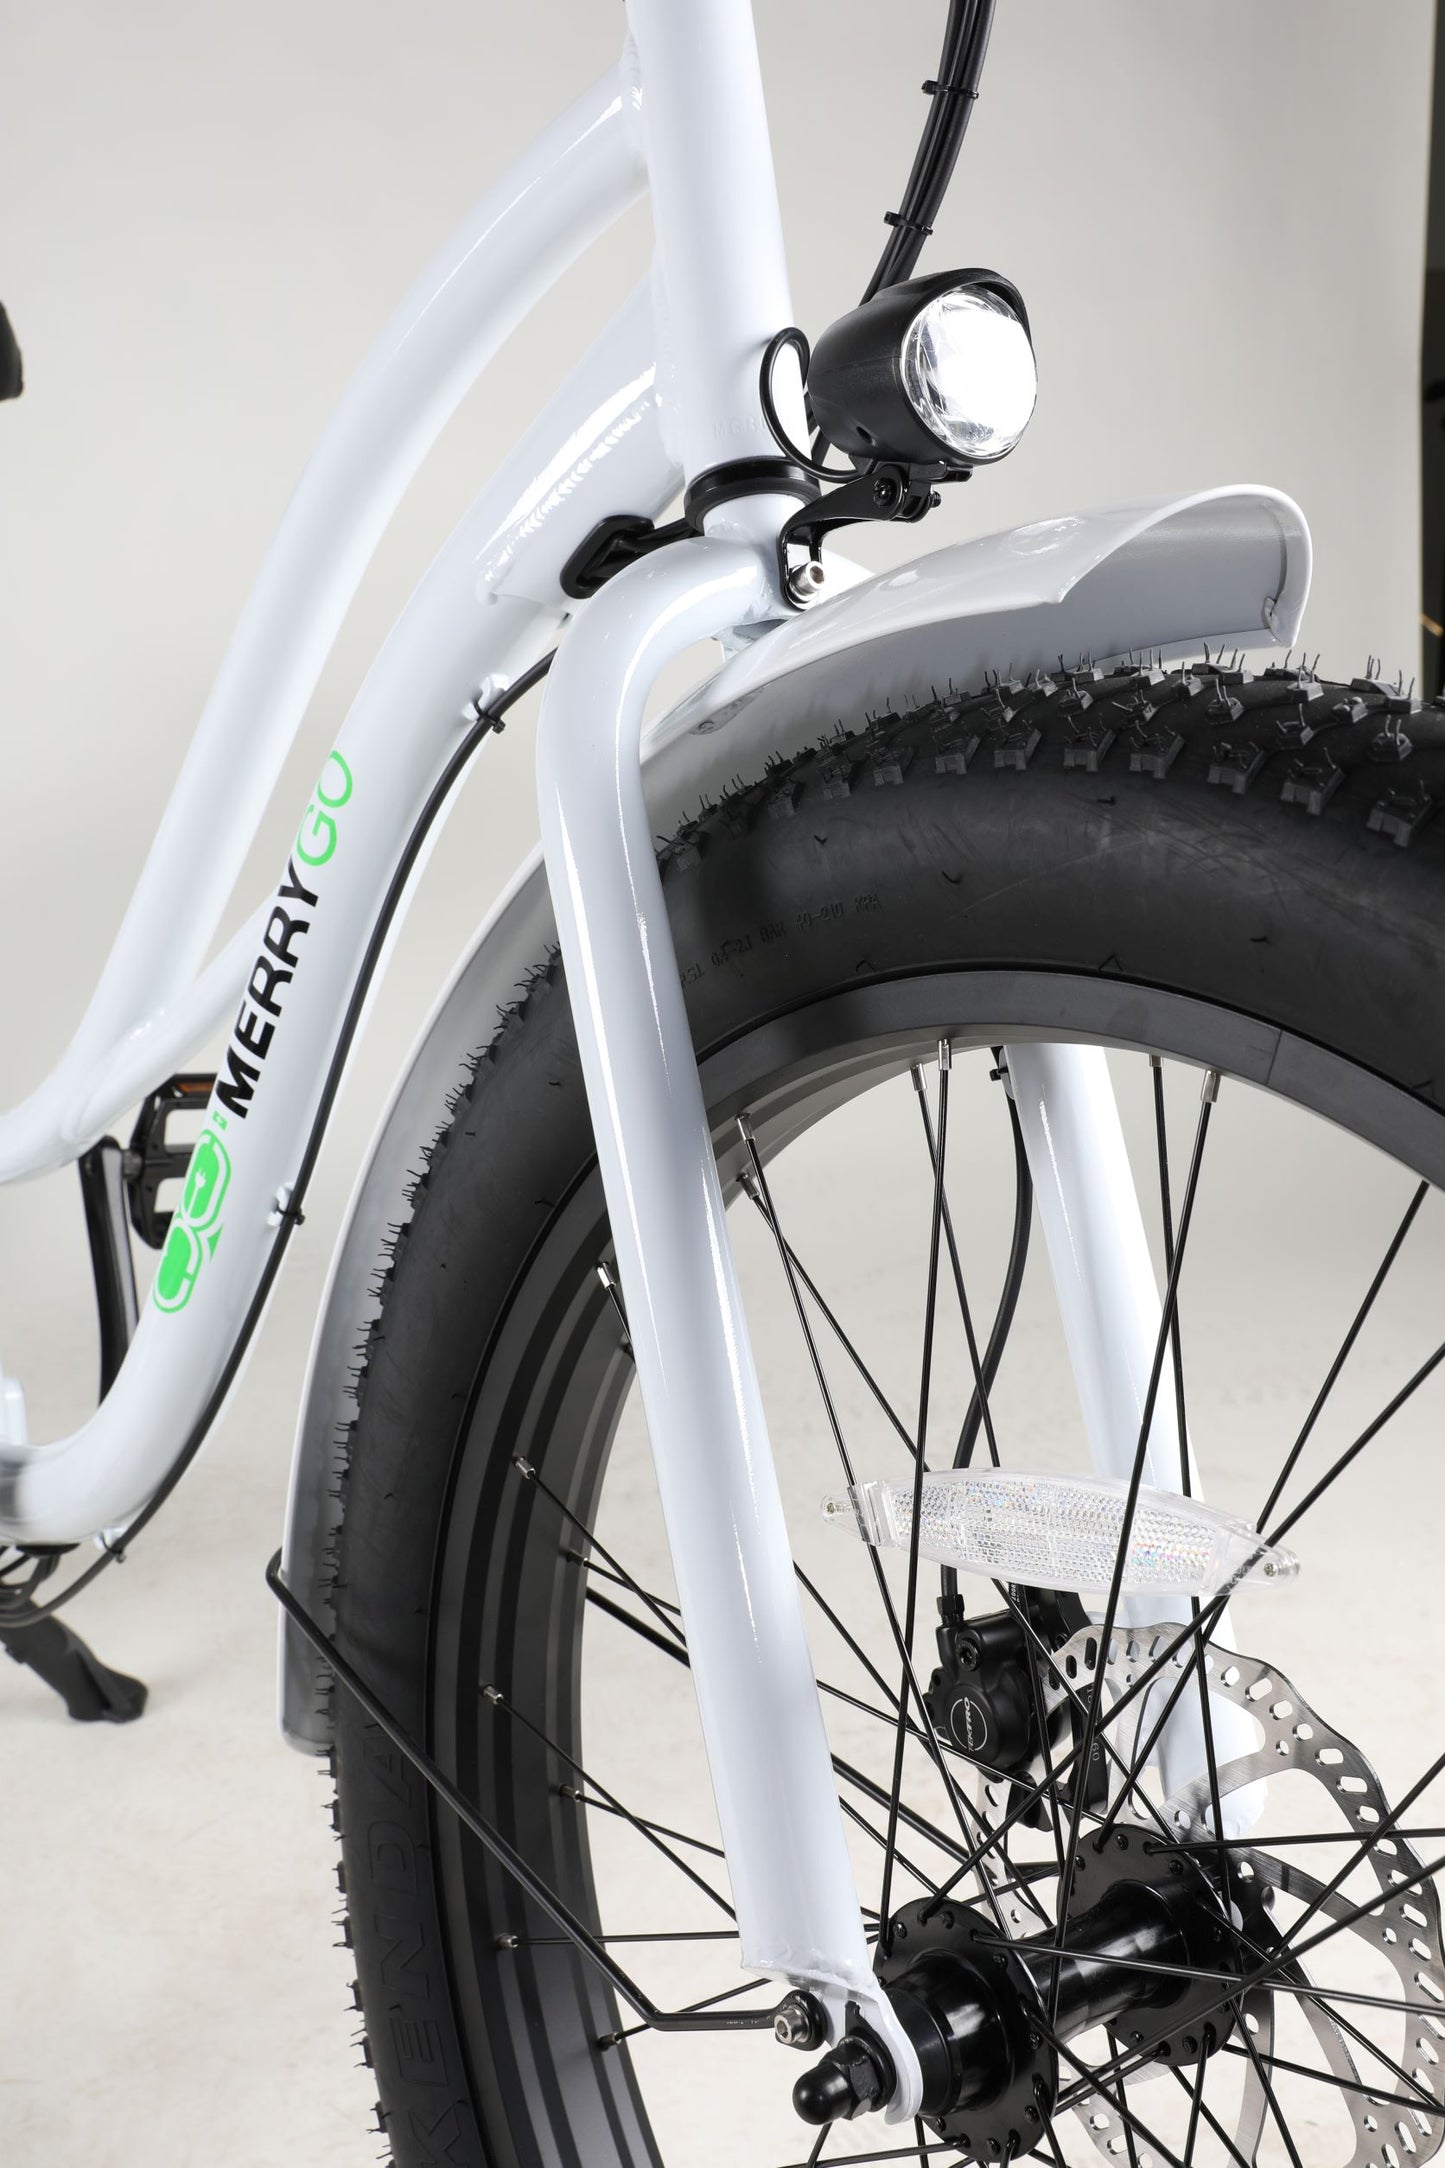 All our electric bikes sport premium components: Kenda tires, Shimano gears, Tektro hydraulic disc brakes, Samsung Battery, Bafang motor, etc. Our mission Buy it once - ride it for life.